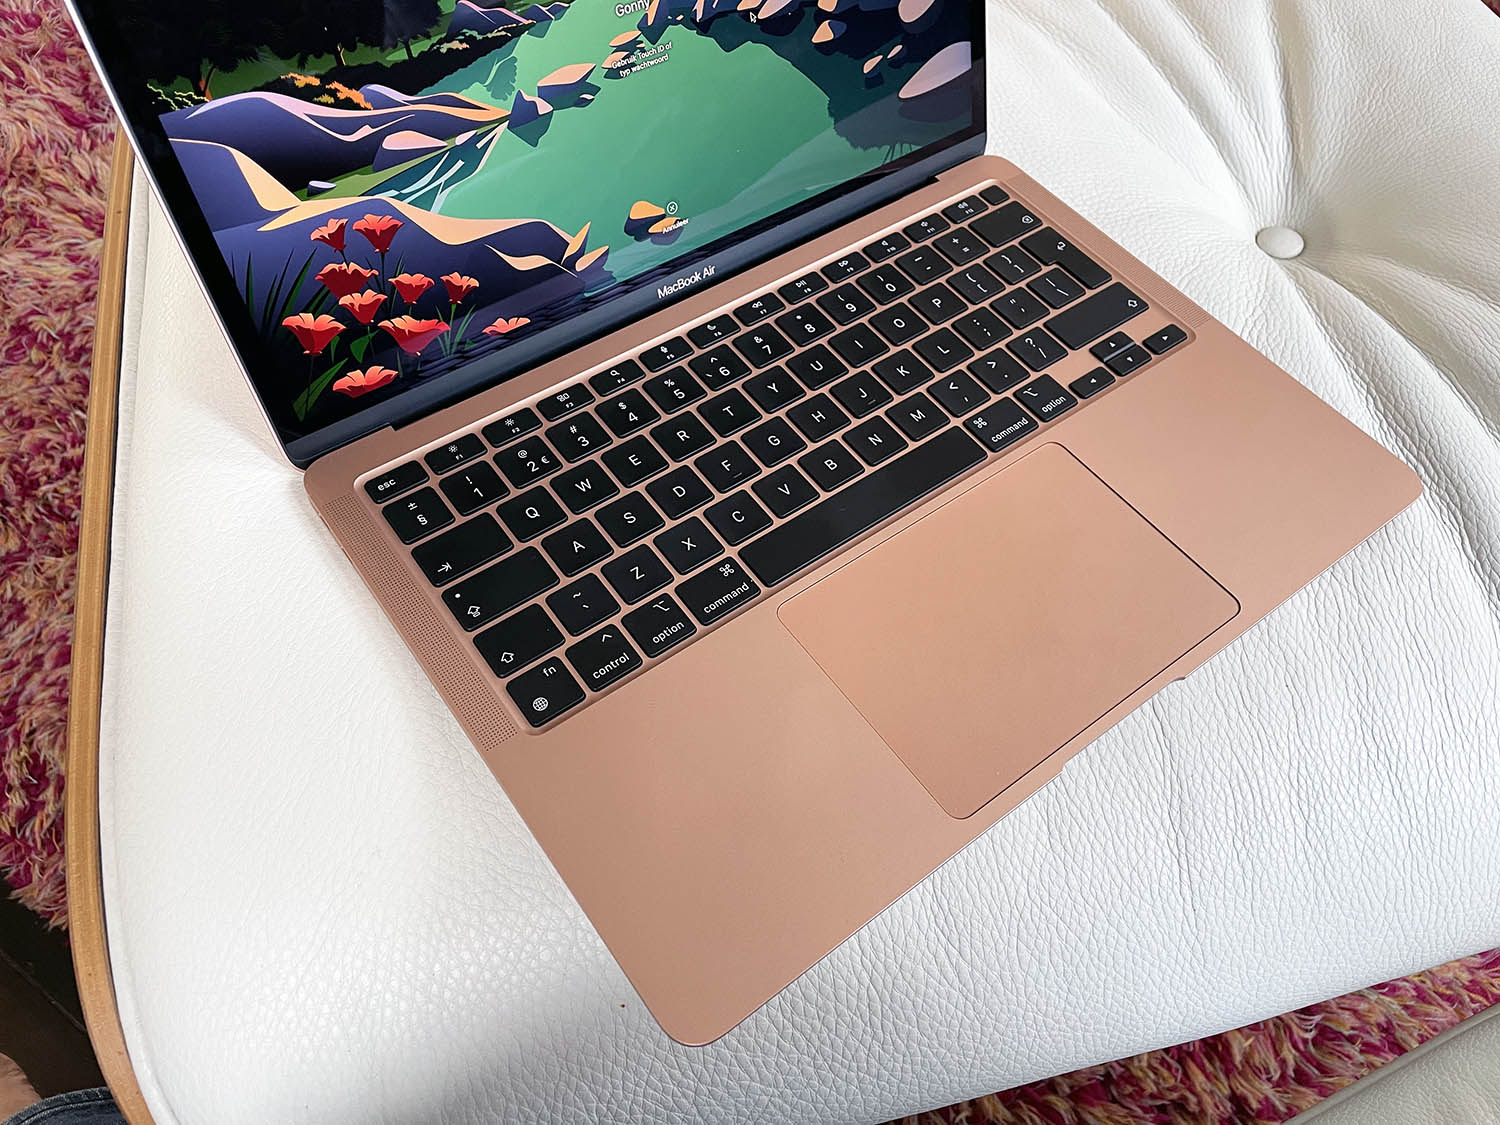 MacBook Air M1 review: trackpad